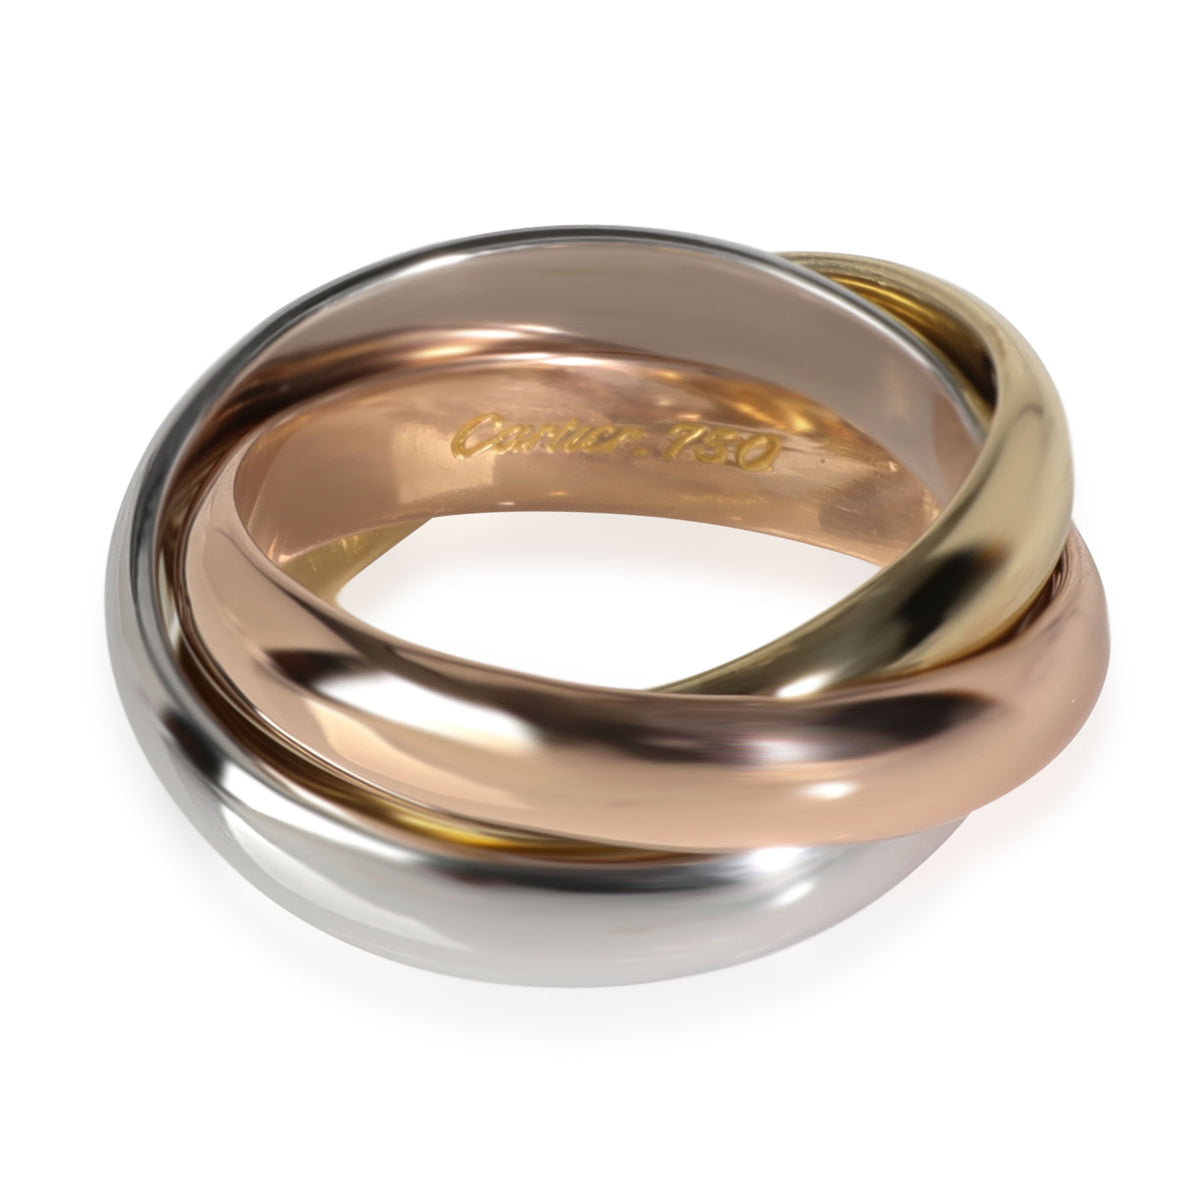 Cartier Trinity Ring in 18k 3 Tone Gold